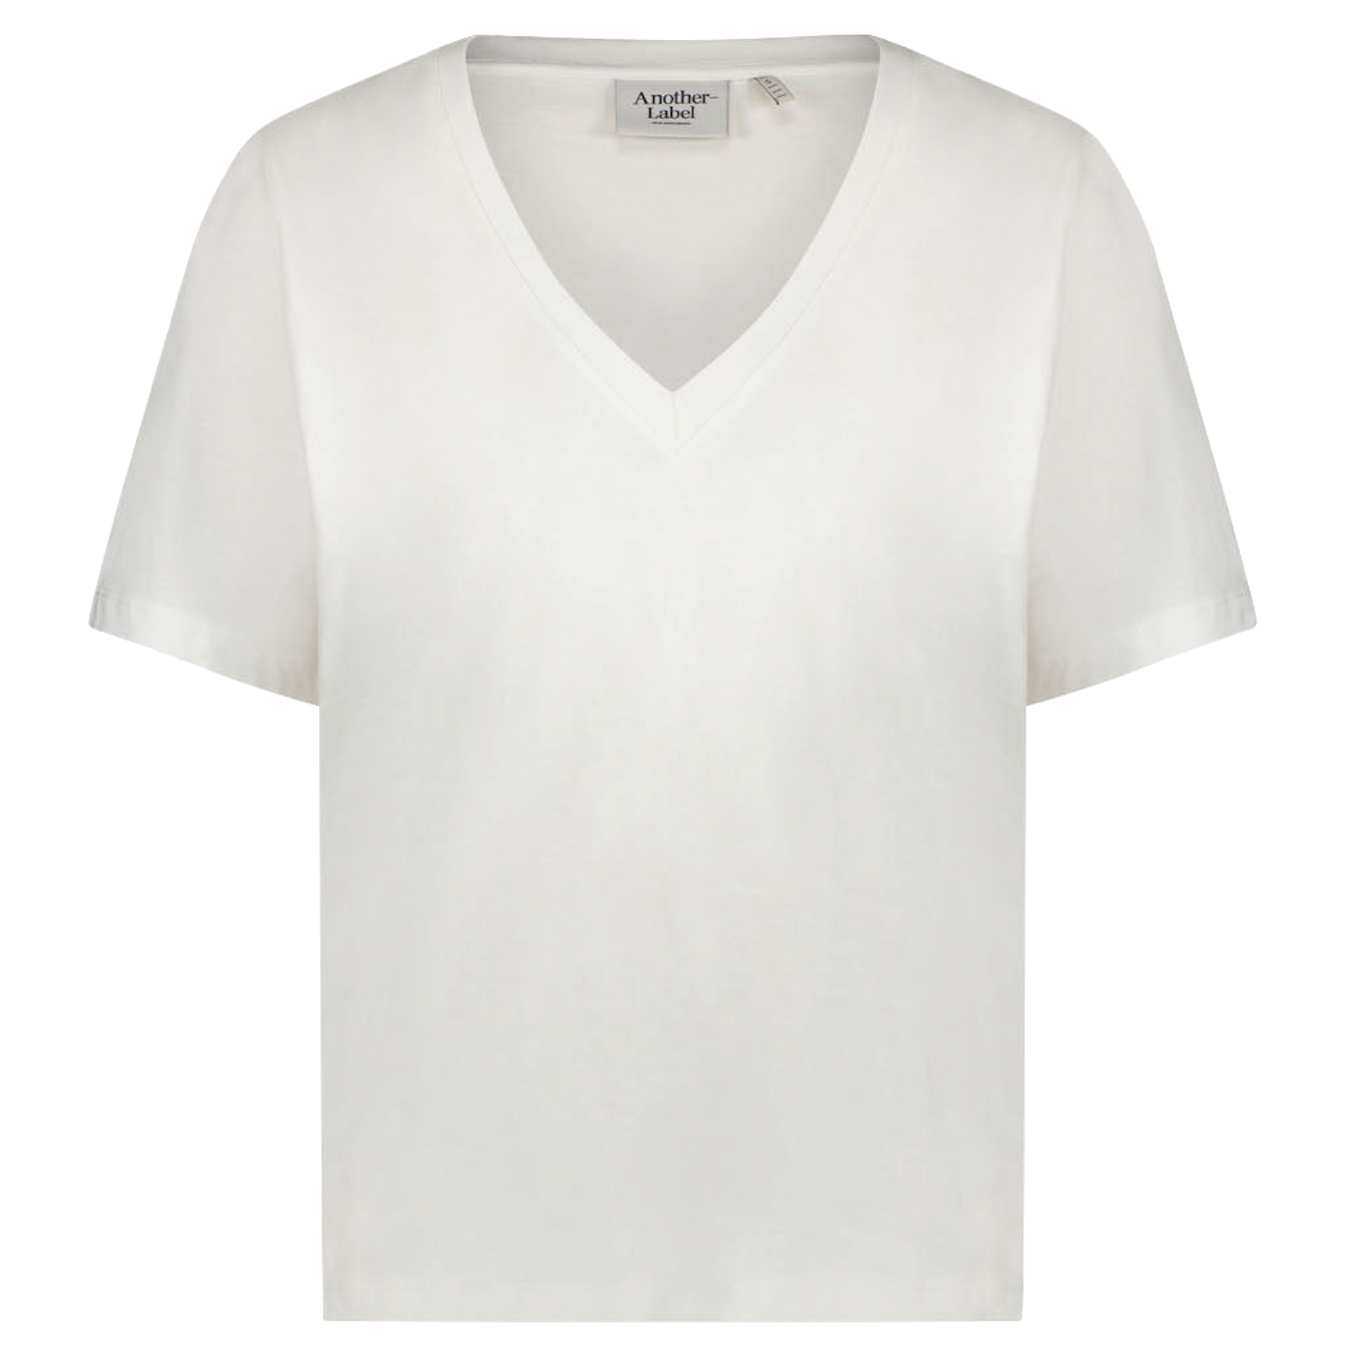 Another-Label Another-Label, Gaure V-Neck T-Shirt, off-white, M